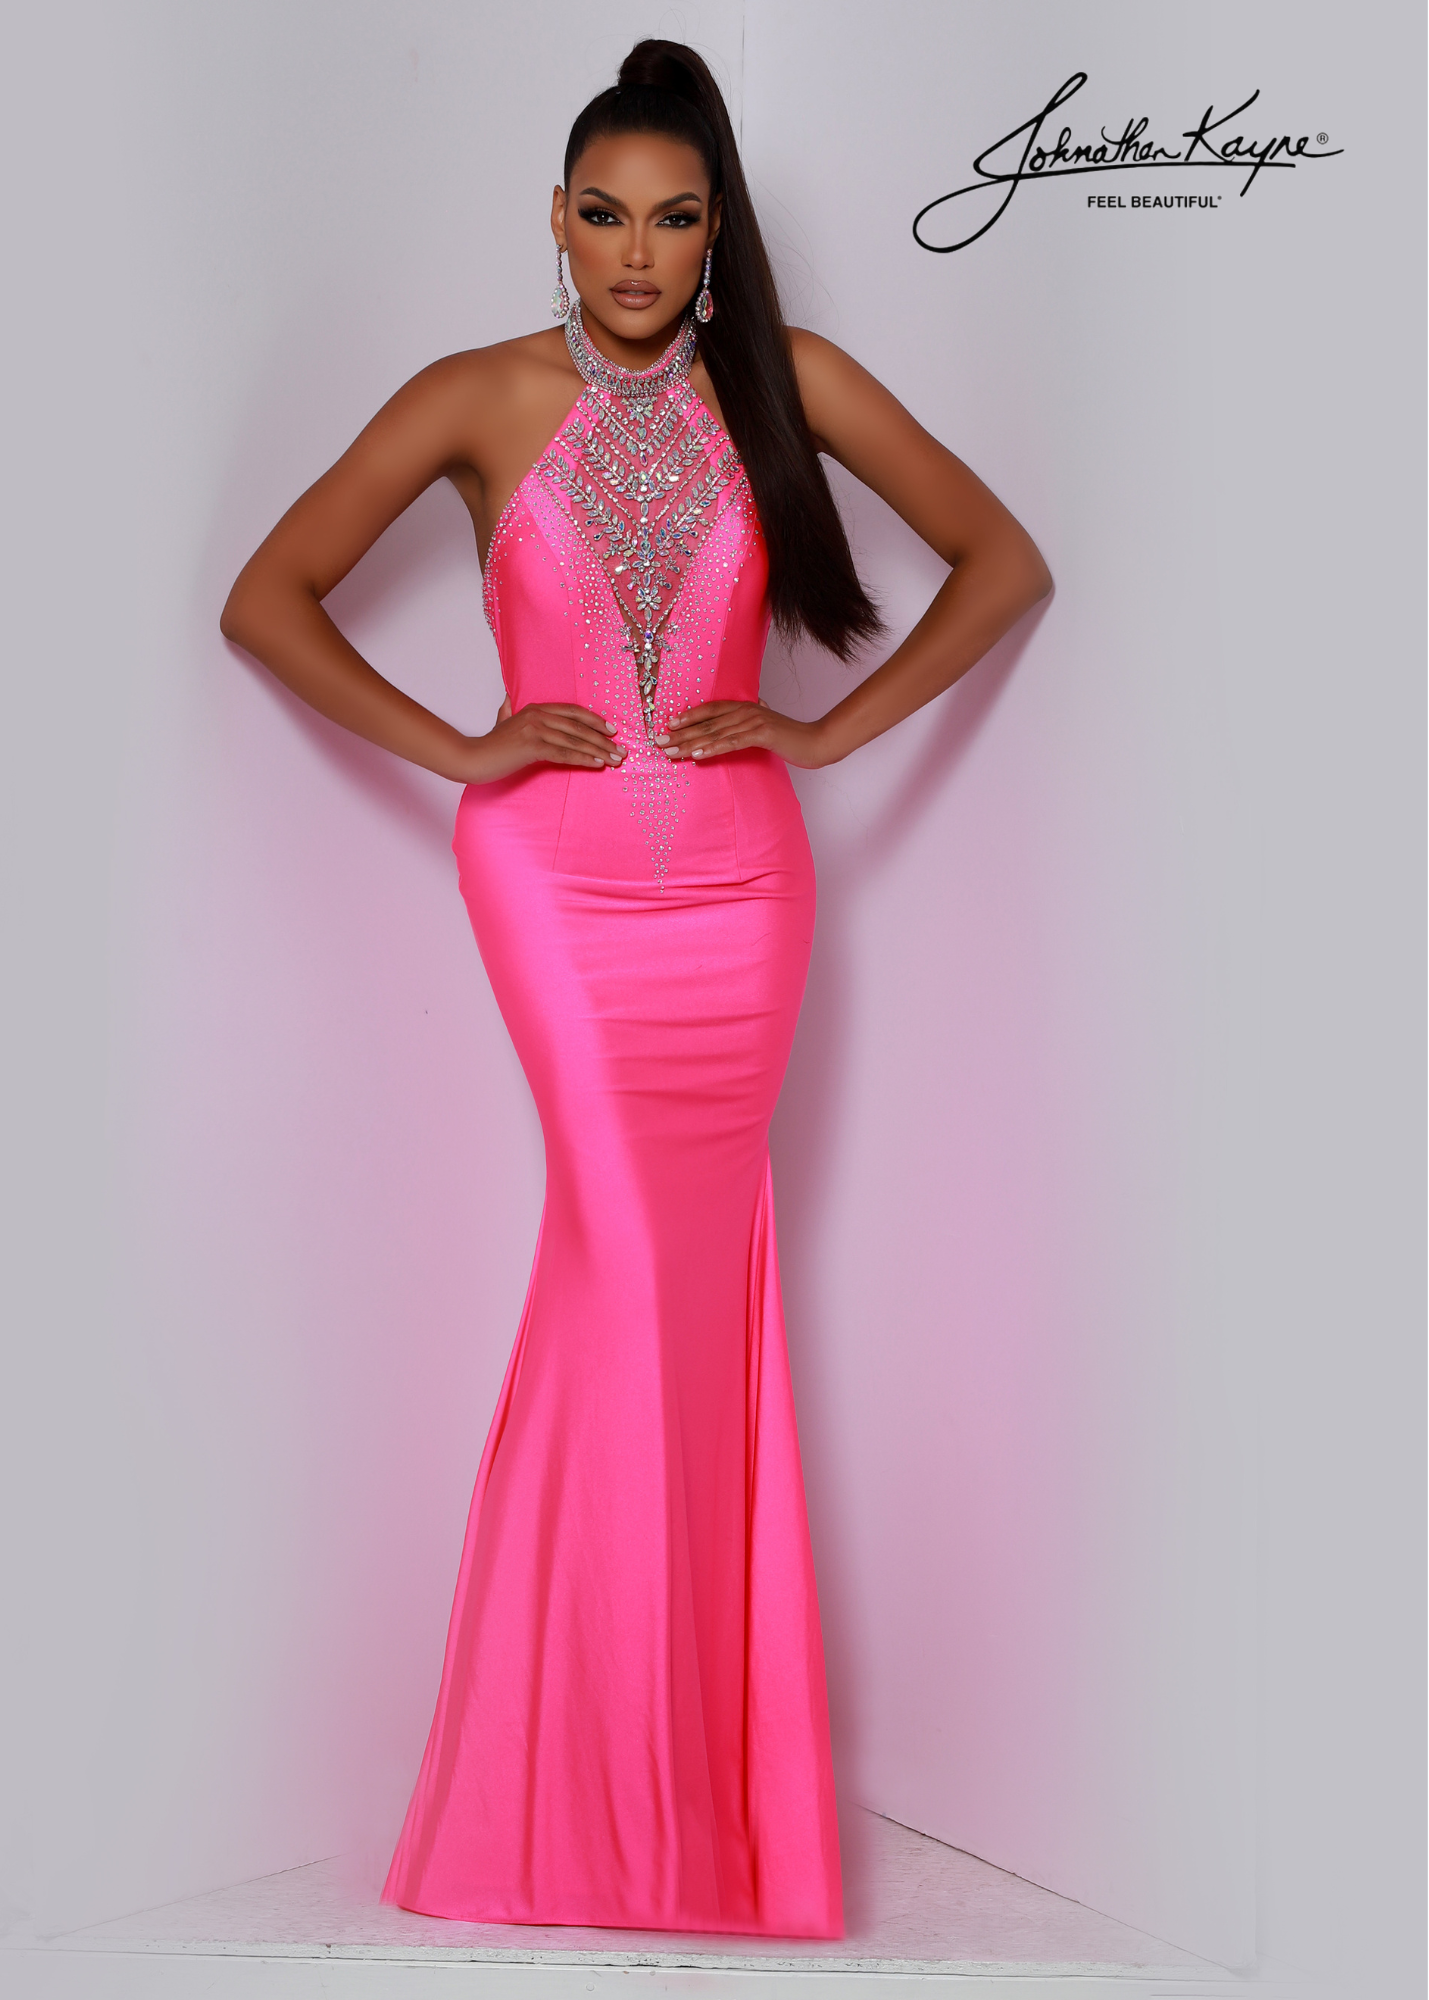 The Johnathan Kayne 2670 Long Prom Dress is the perfect formal gown for your next event. Featuring a lush mermaid silhouette and hand-beaded halter neckline and open back, this designer piece offers an eye-catching look without compromising on comfort and elegance. Sophistication at its finest! This jaw-dropping high-neck halter in 4 way stretch lycra has a hand beaded neckline which is sensational for any special event.